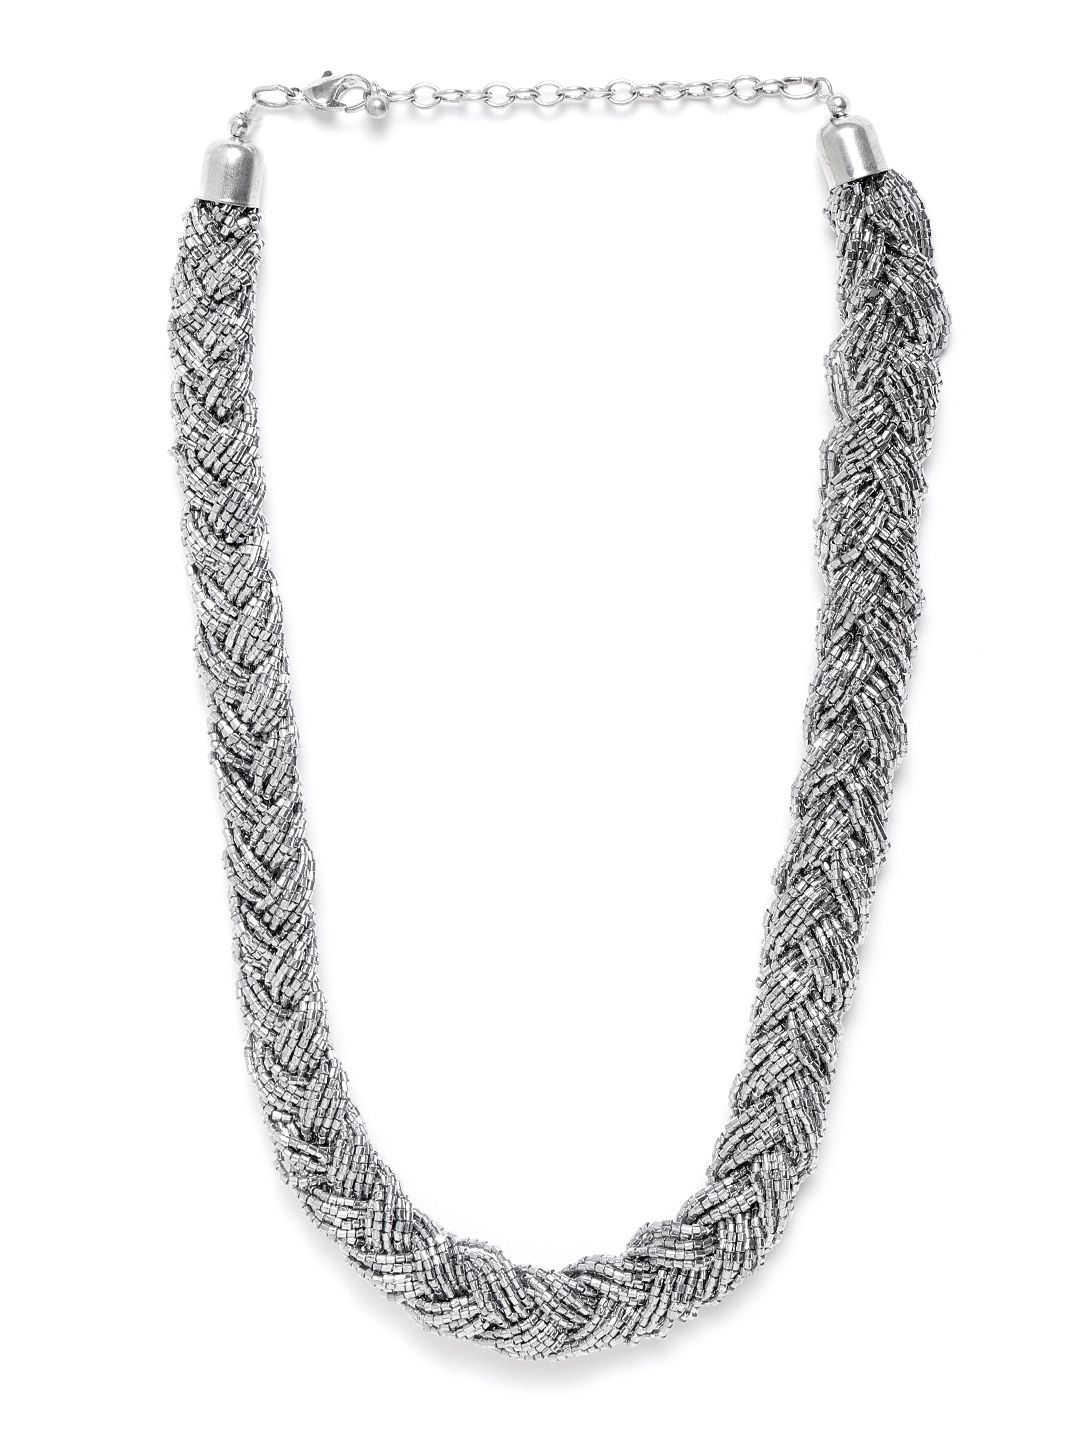 RICHEERA Silver-Toned Glass Beaded Statement Braided Necklace Price in India